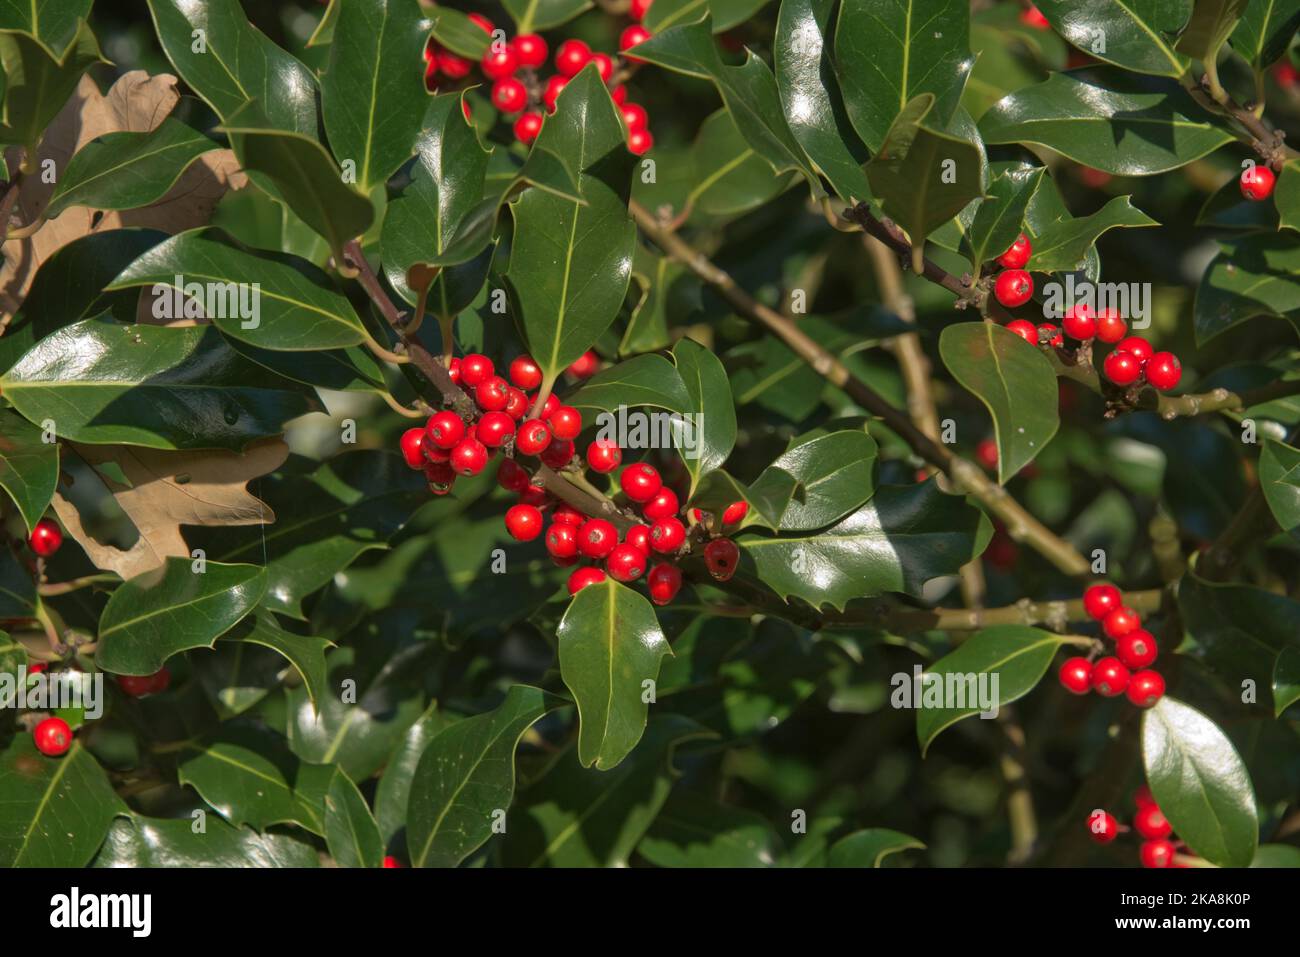 Ripe red holly (Ilex aquifolium) berries among upper most non-spiky leaves on the tree in early autumn, Berkshire, October Stock Photo